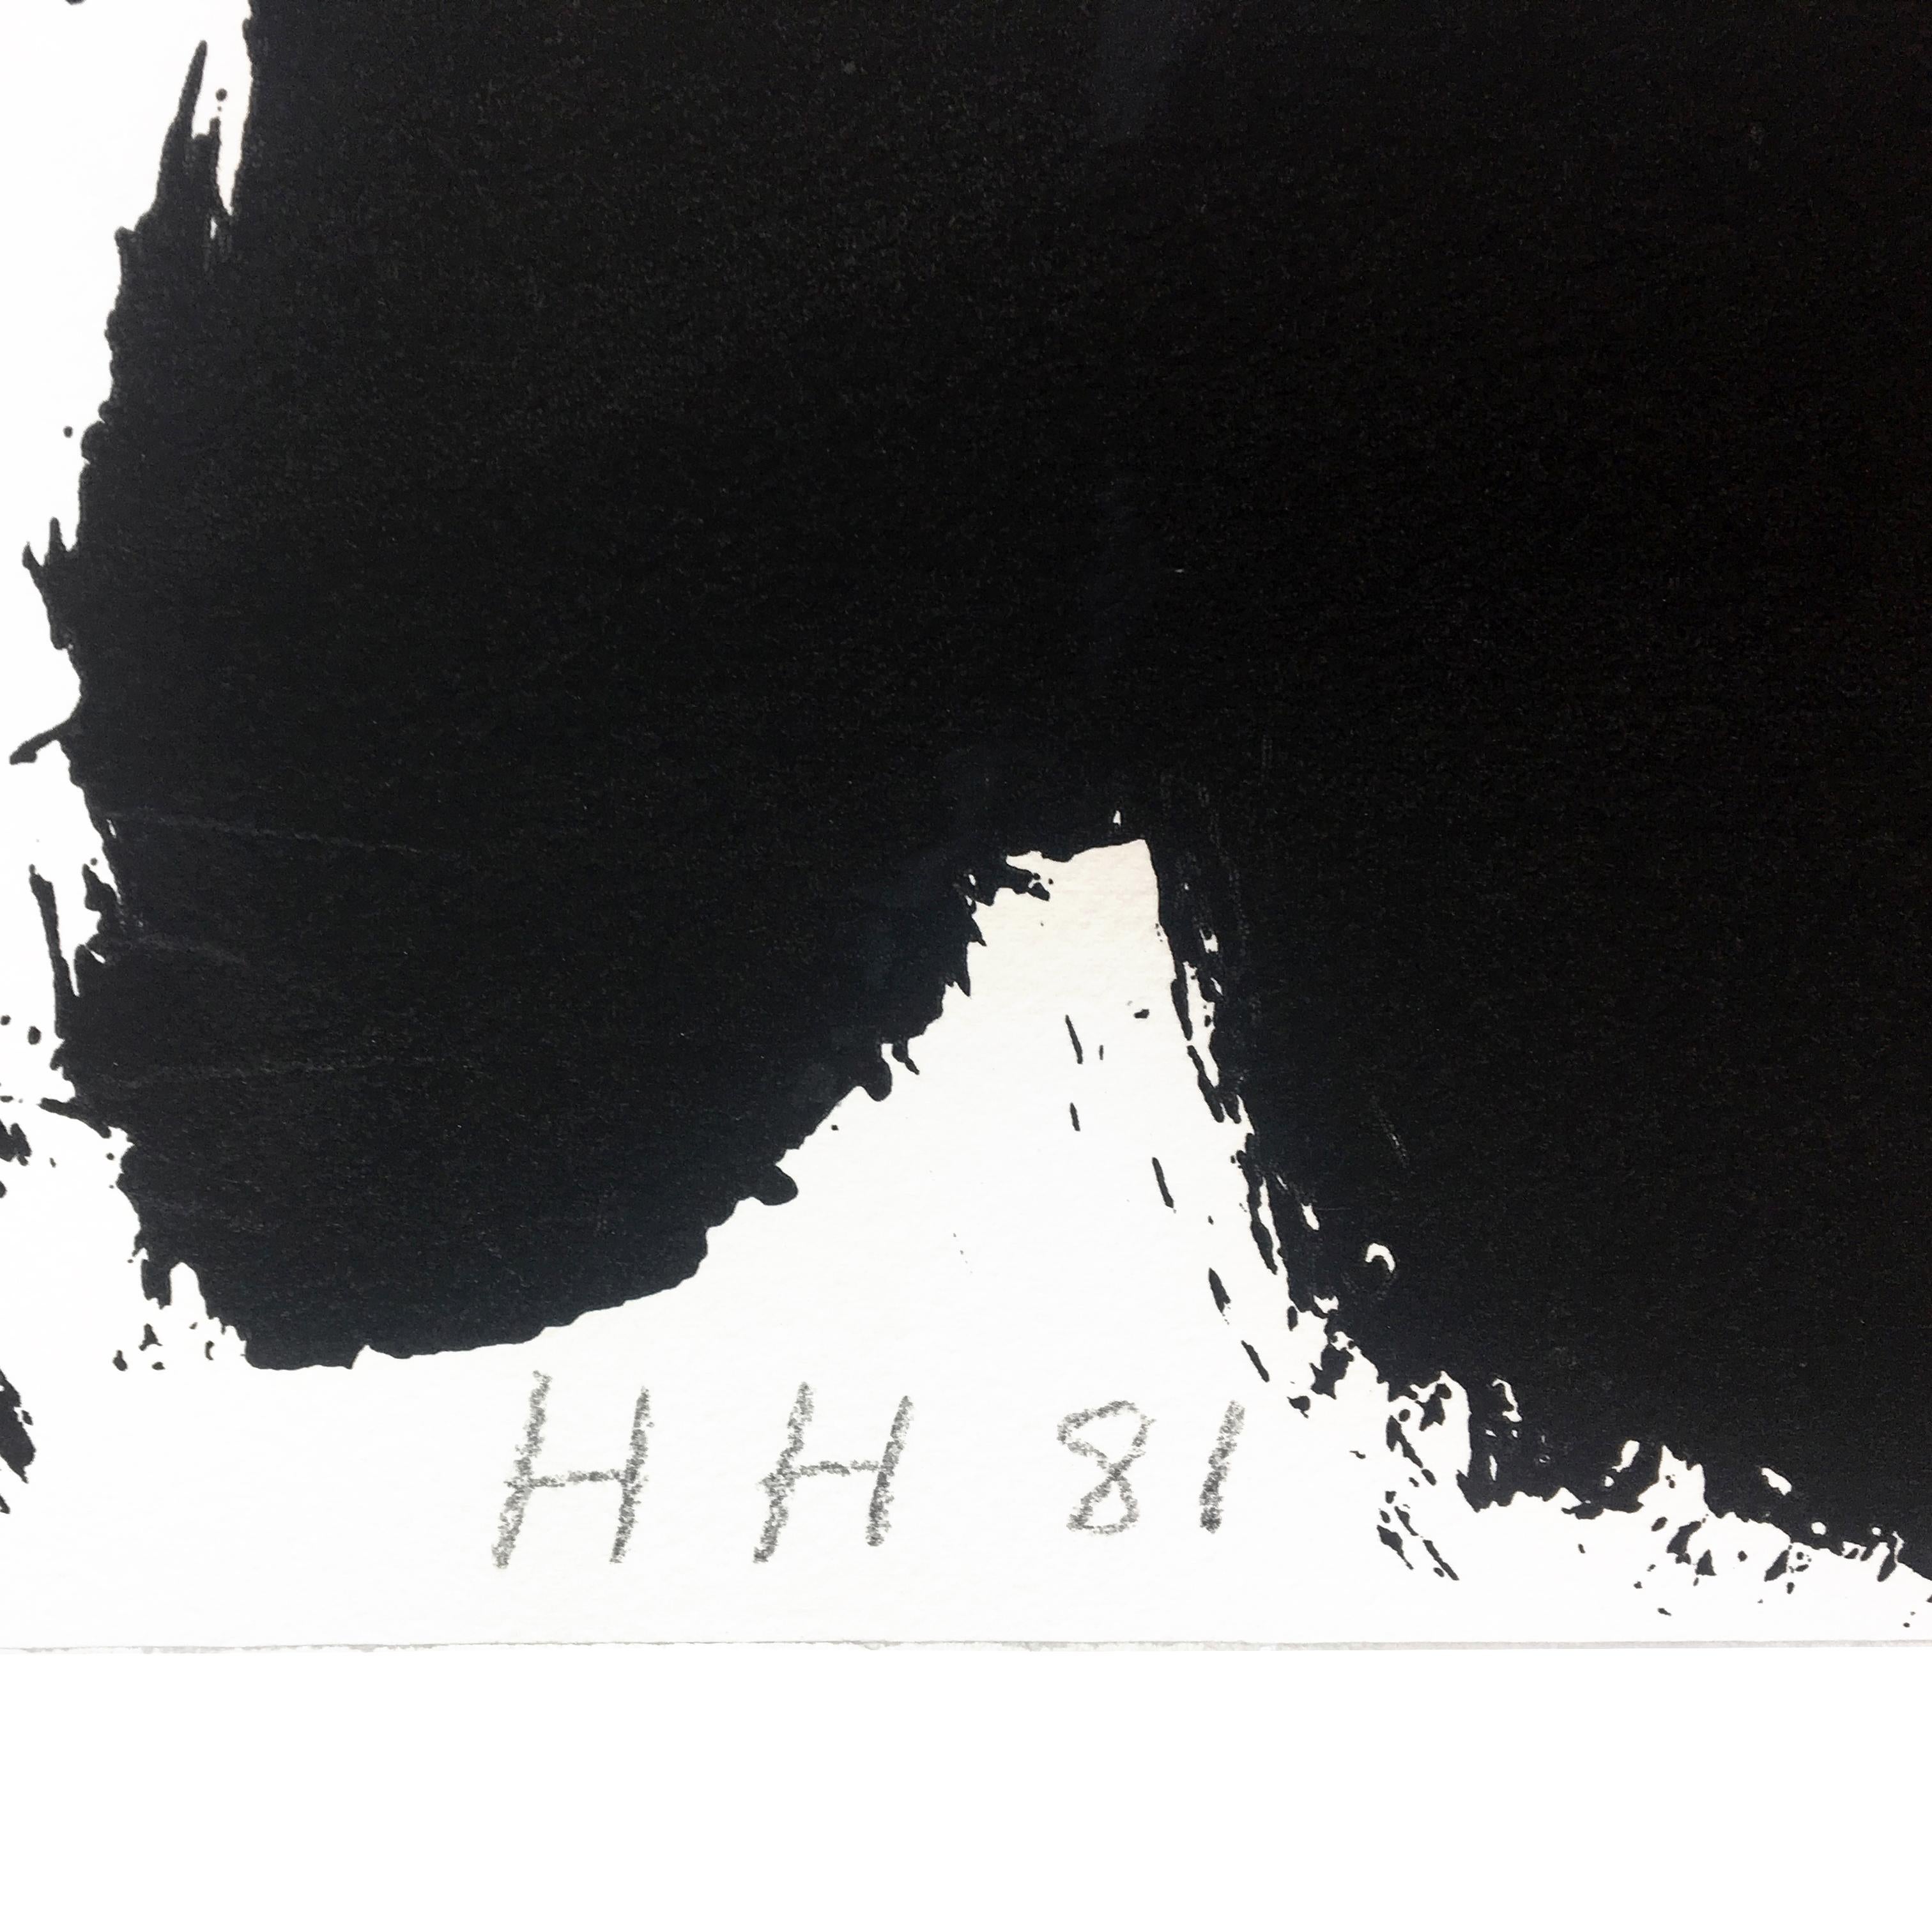 Souvenir: large scale black white and gray abstract interior scene  - Print by Howard Hodgkin